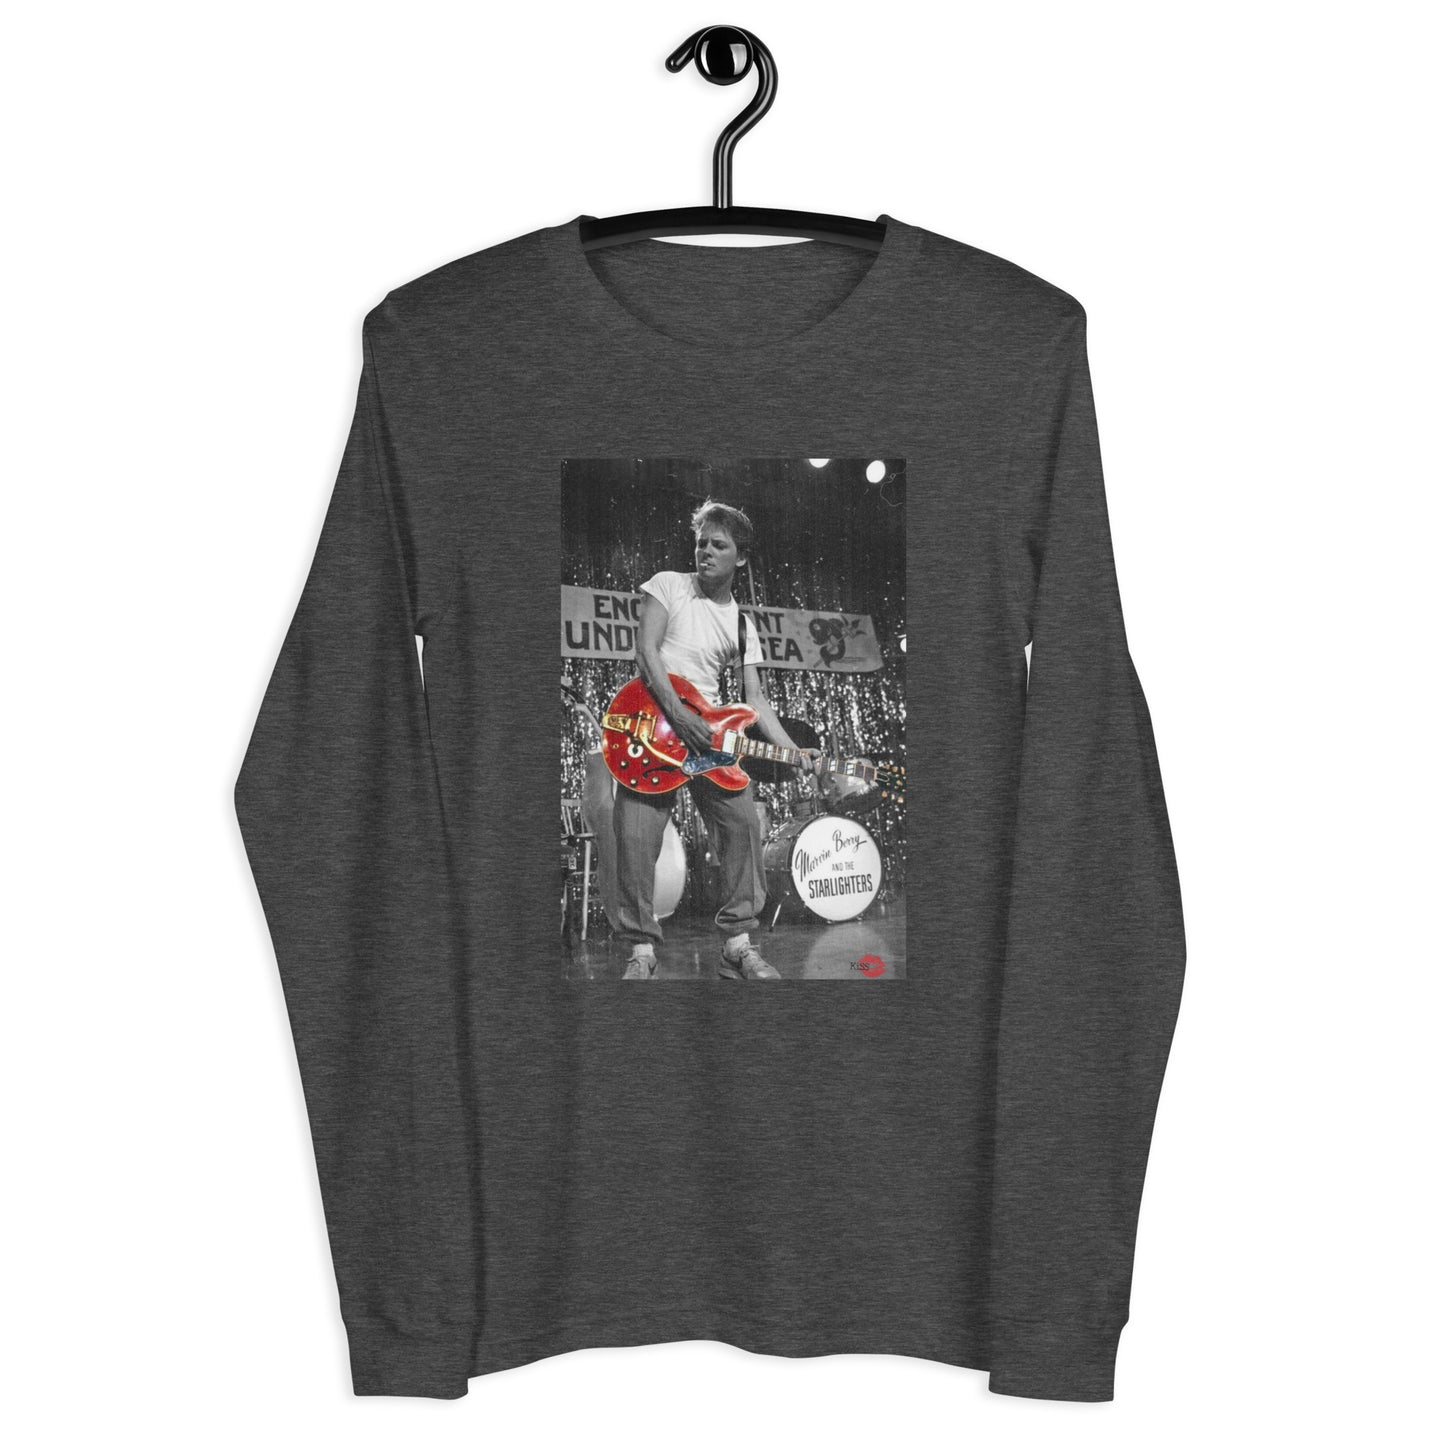 Marty McFly Guitar KiSS Unisex Long Sleeve Tee - Johnny B Goode inspired Back to the Future 80s